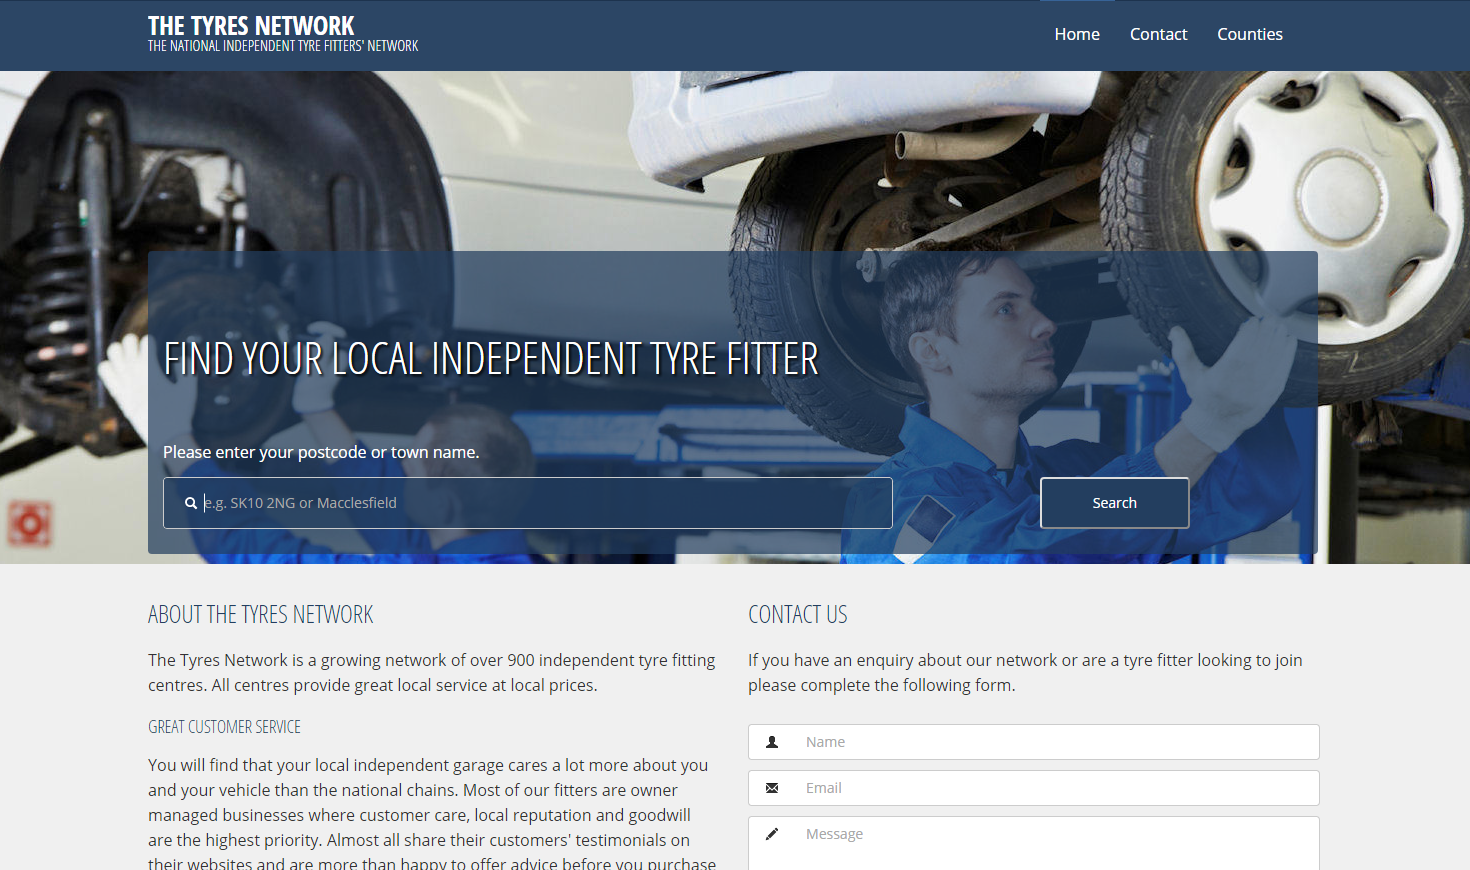 Micheldever’s TyreClick to support independents’ online competitiveness